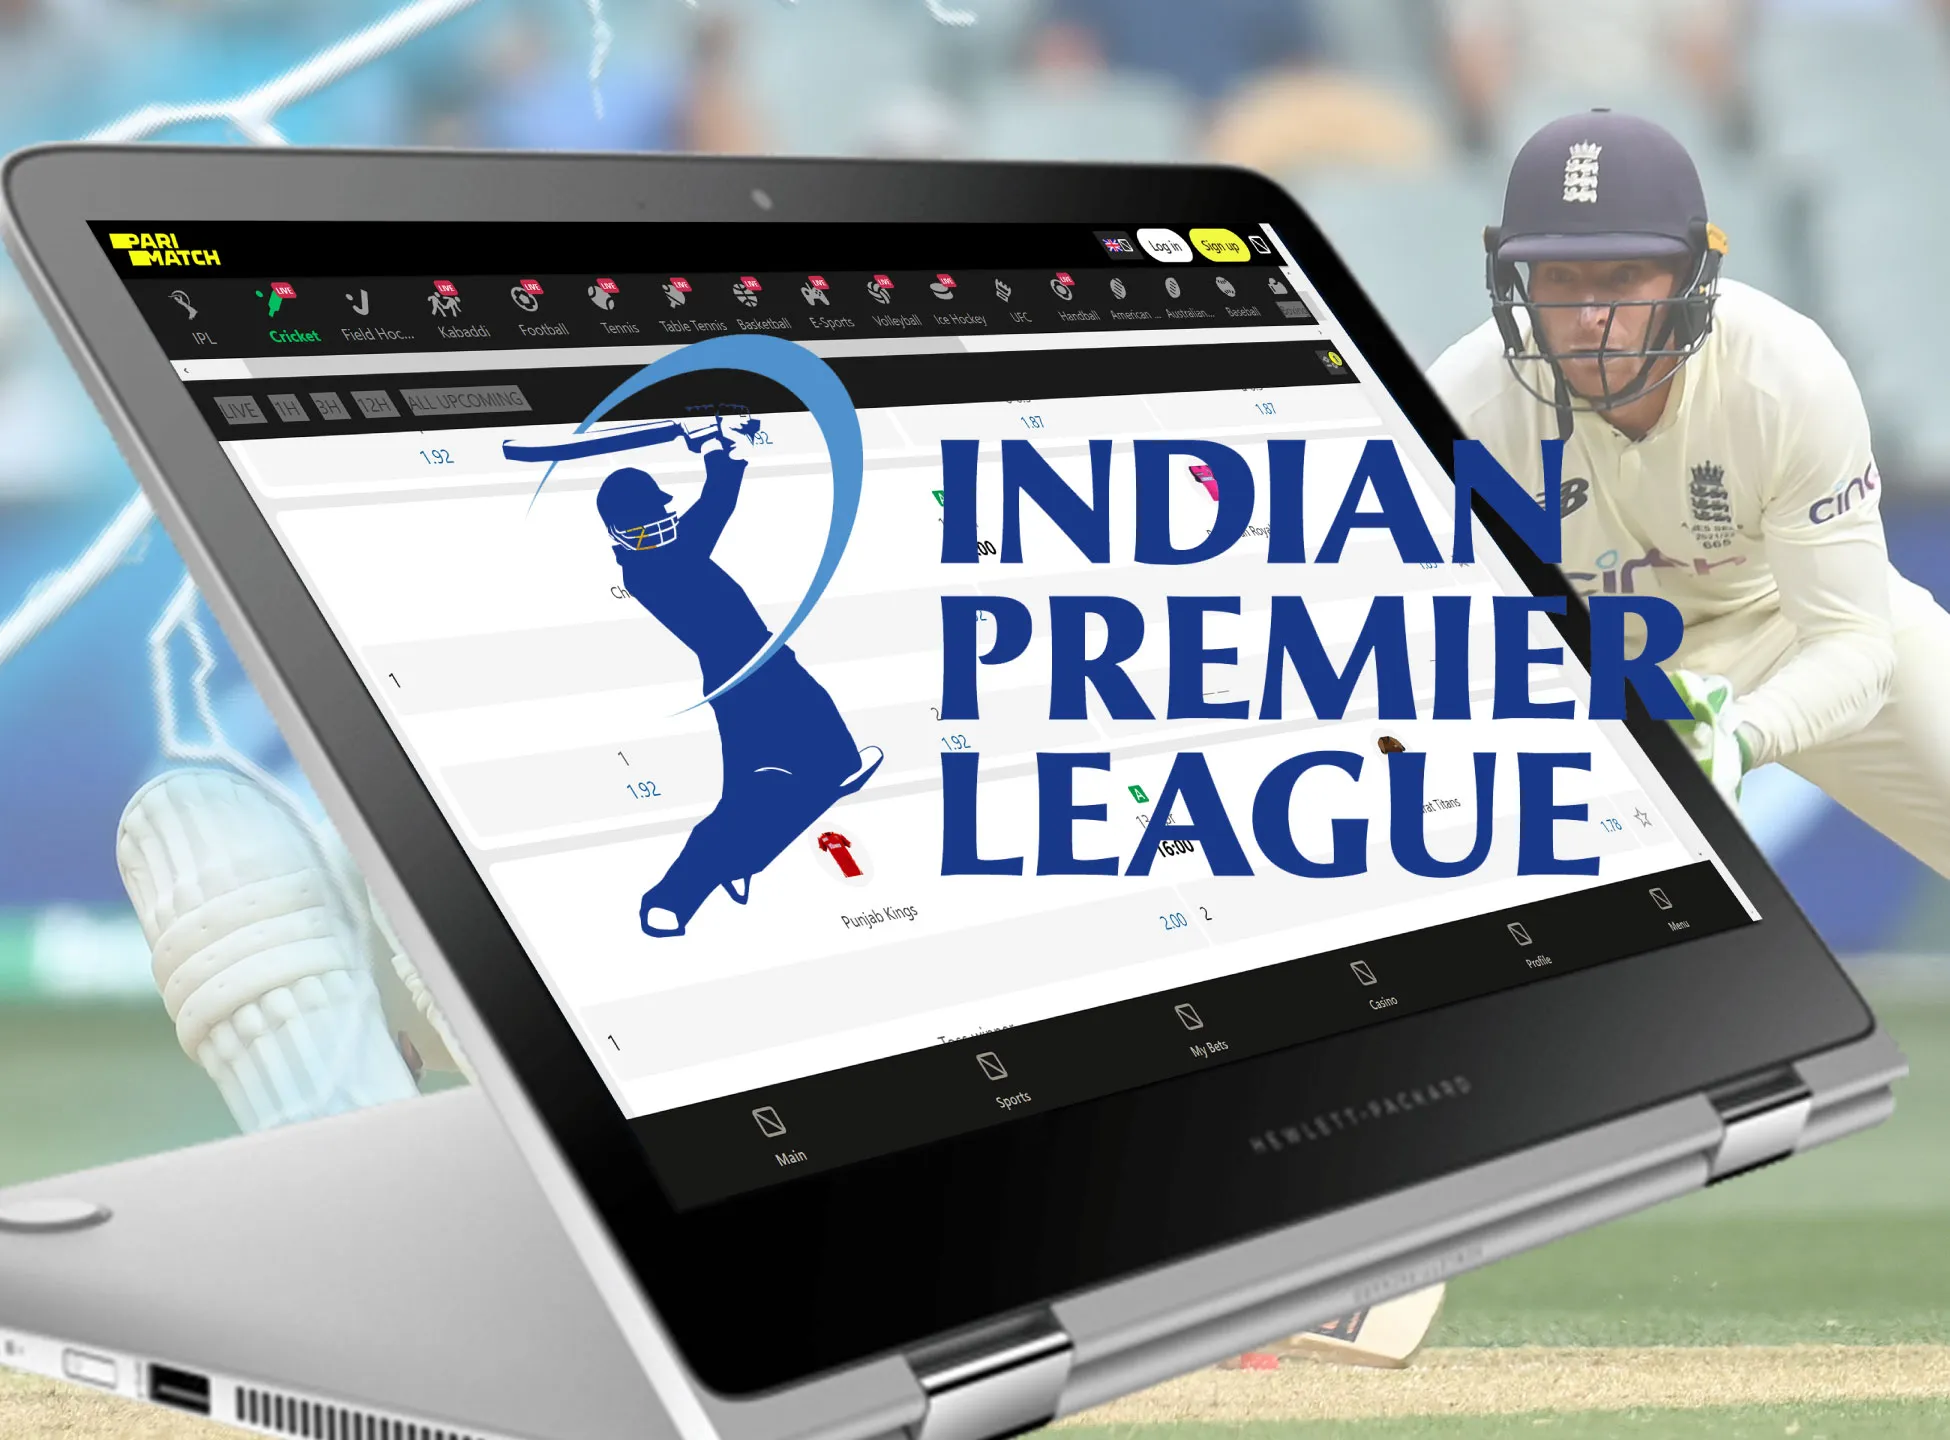 Place bets on the IPL matches on these websites.